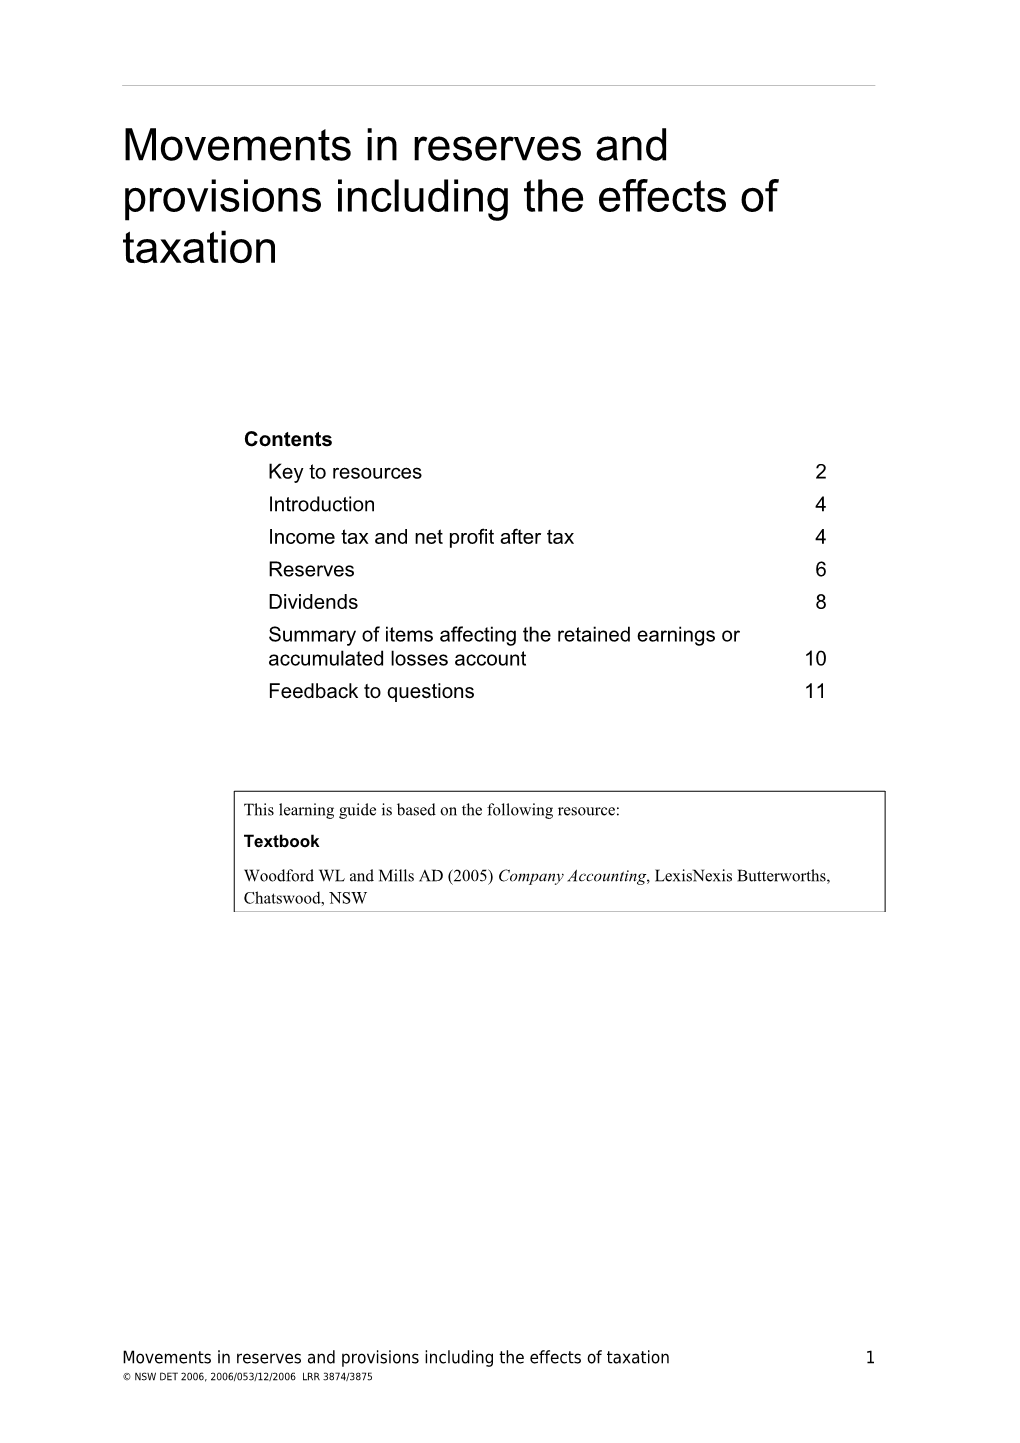 Movements in Reserves and Provisions Including the Effects of Taxation